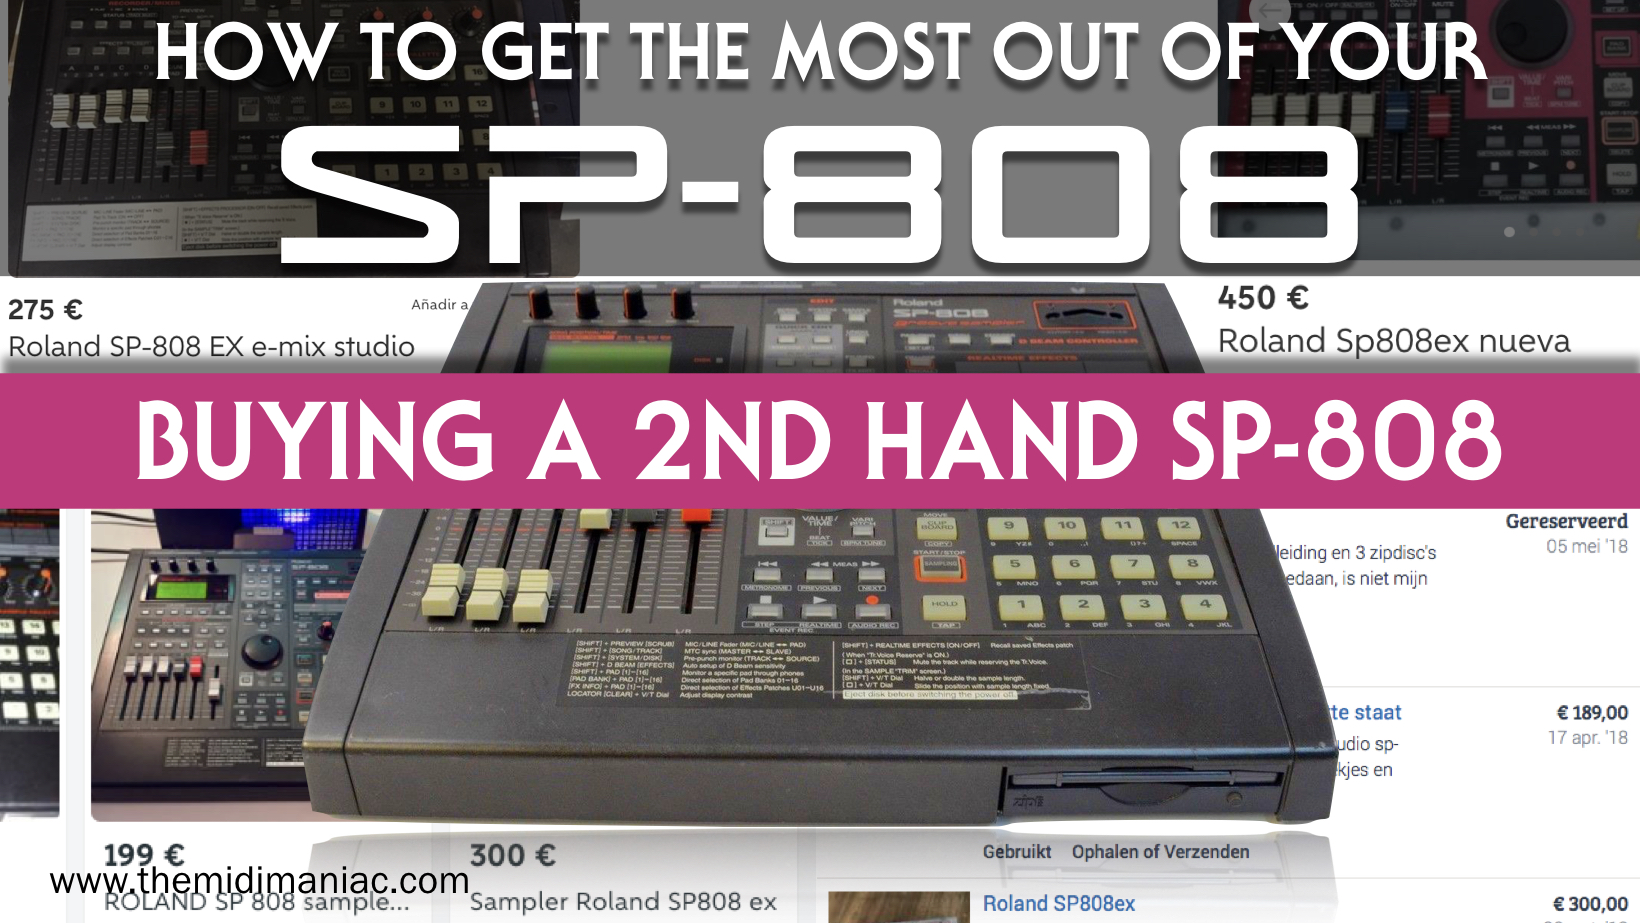 Tips for buying a second hand Roland SP-808